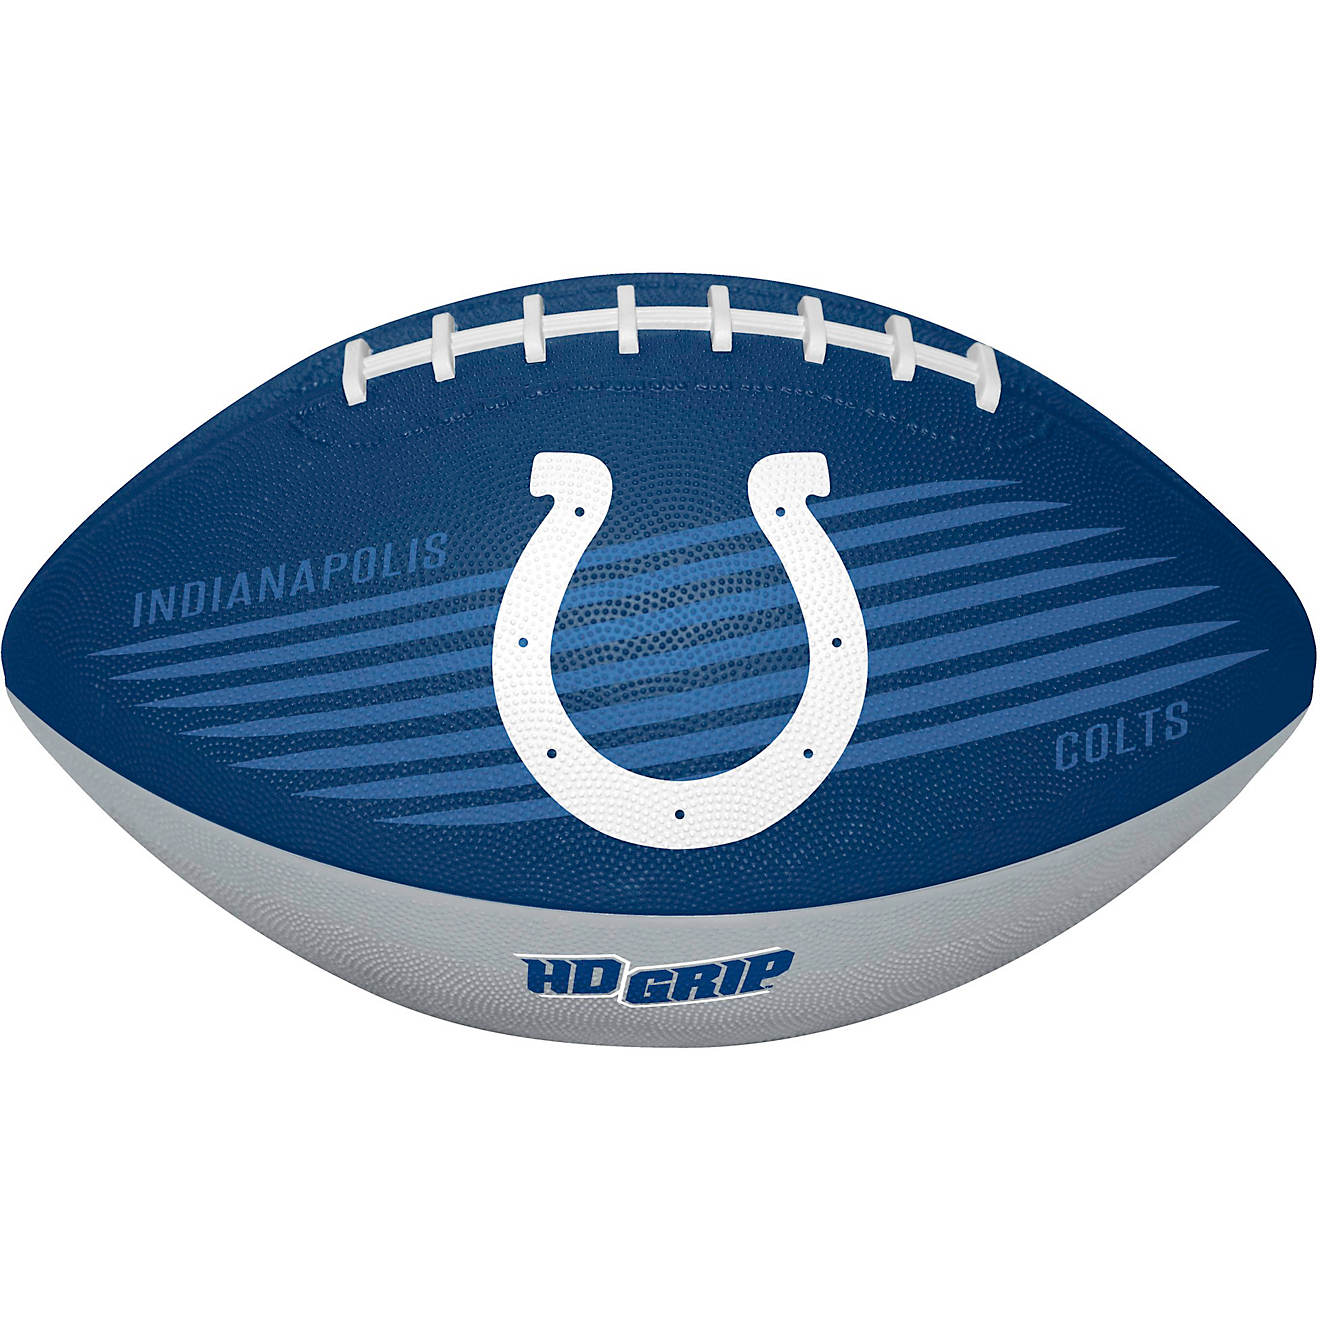 Rawlings Indianapolis Colts Downfield Youth Rubber Football                                                                      - view number 1